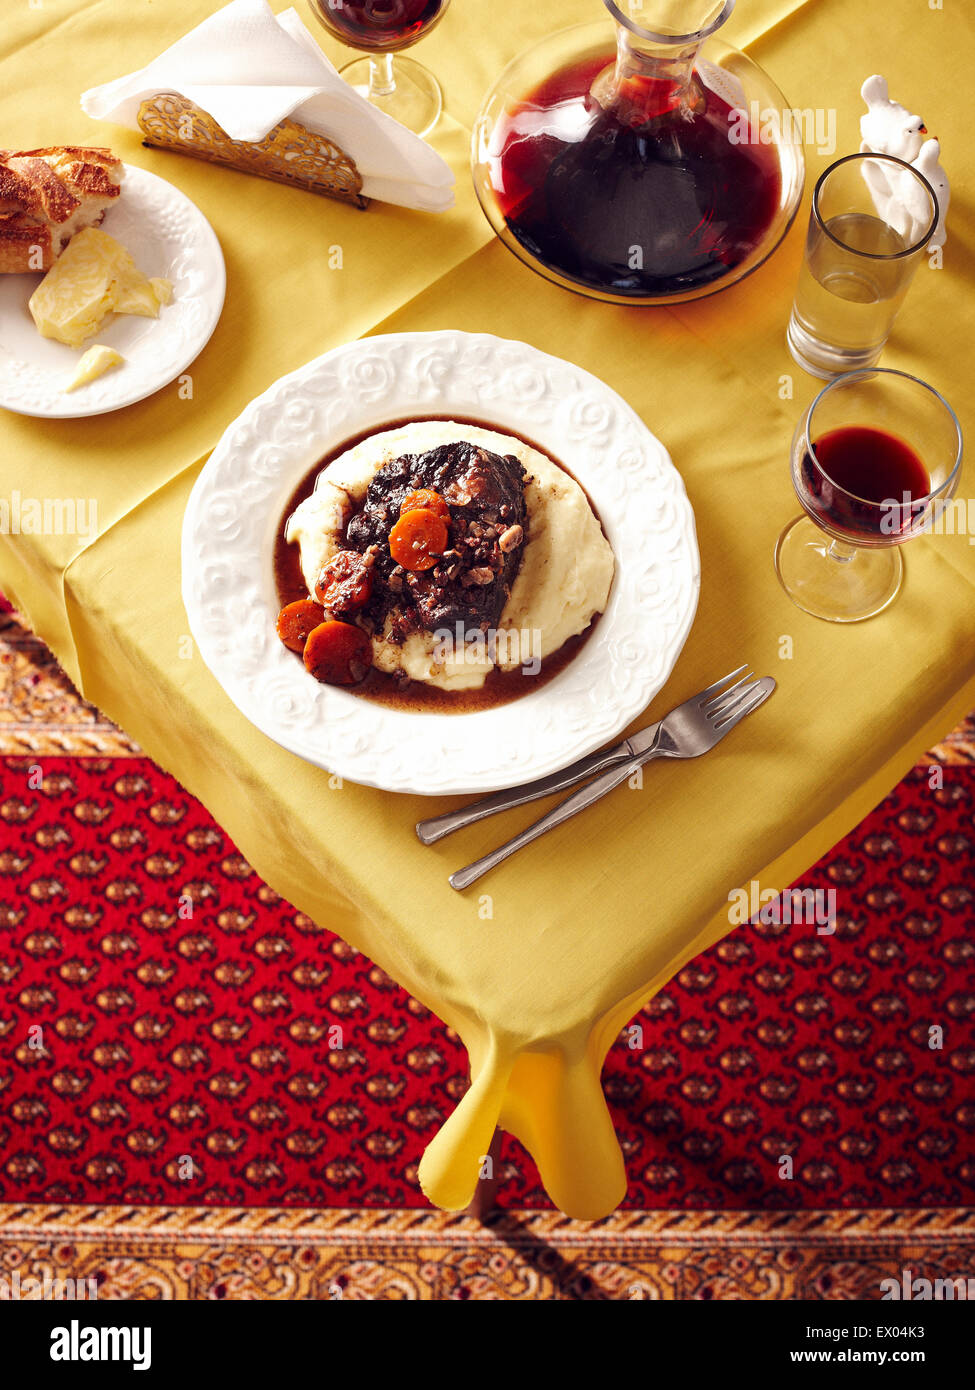 Overhead view of table with beef cheek stew and red wine carafe Stock Photo